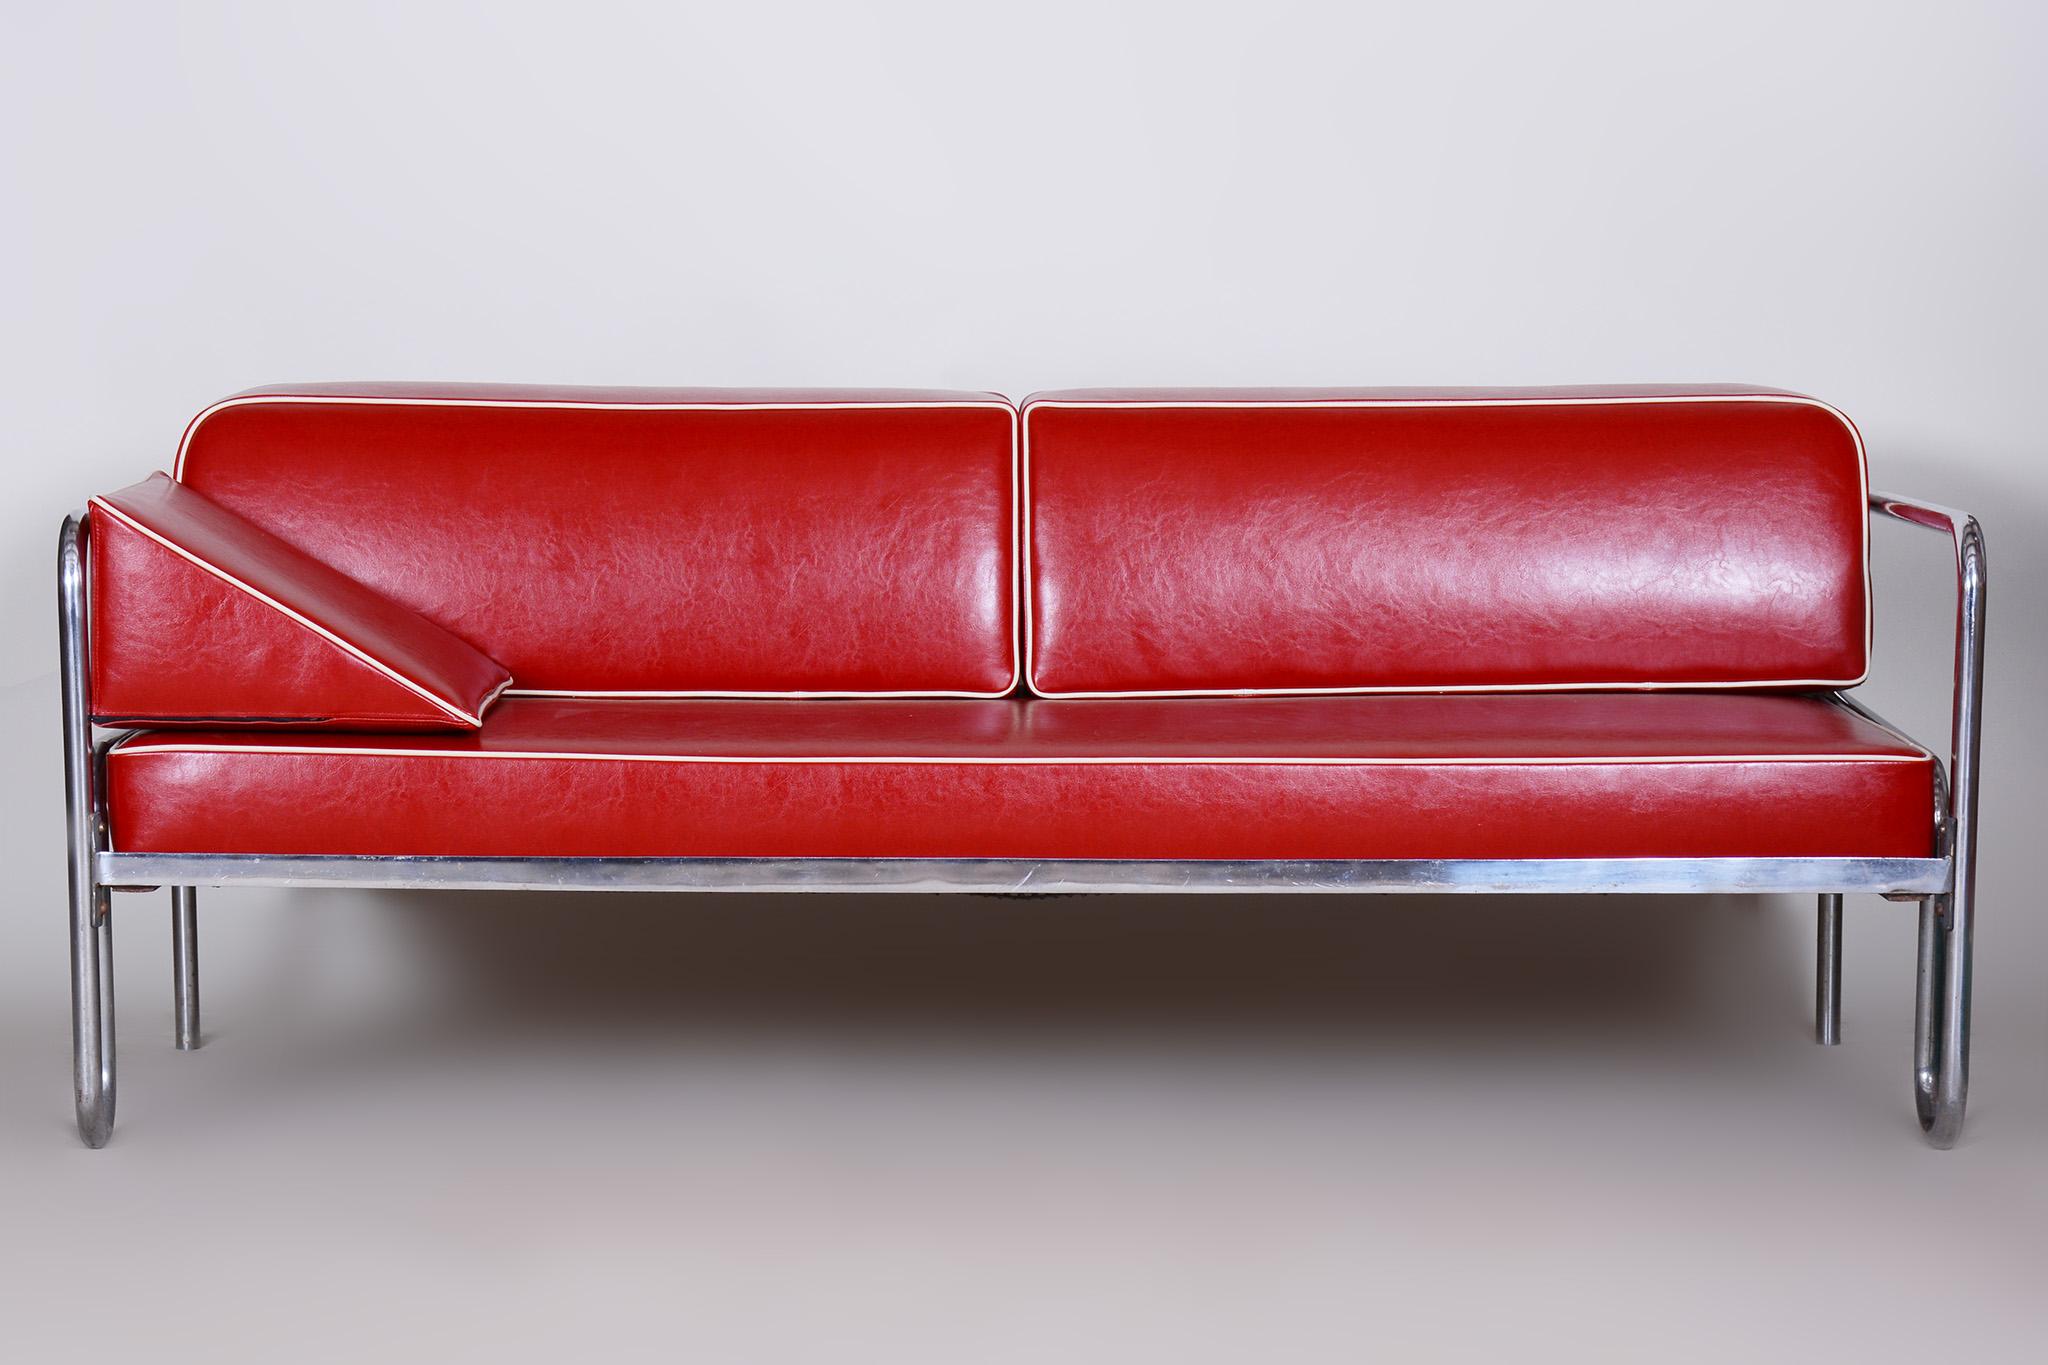 Fully restored red Bauhaus sofa with chrome tubular steel frame.

Period: 1930-1939
Source: Czechia (Czechoslovakia)
Material: high-quality leather, chrome-plated steel

The chrome is in excellent condition.
Professionally upholstered in high